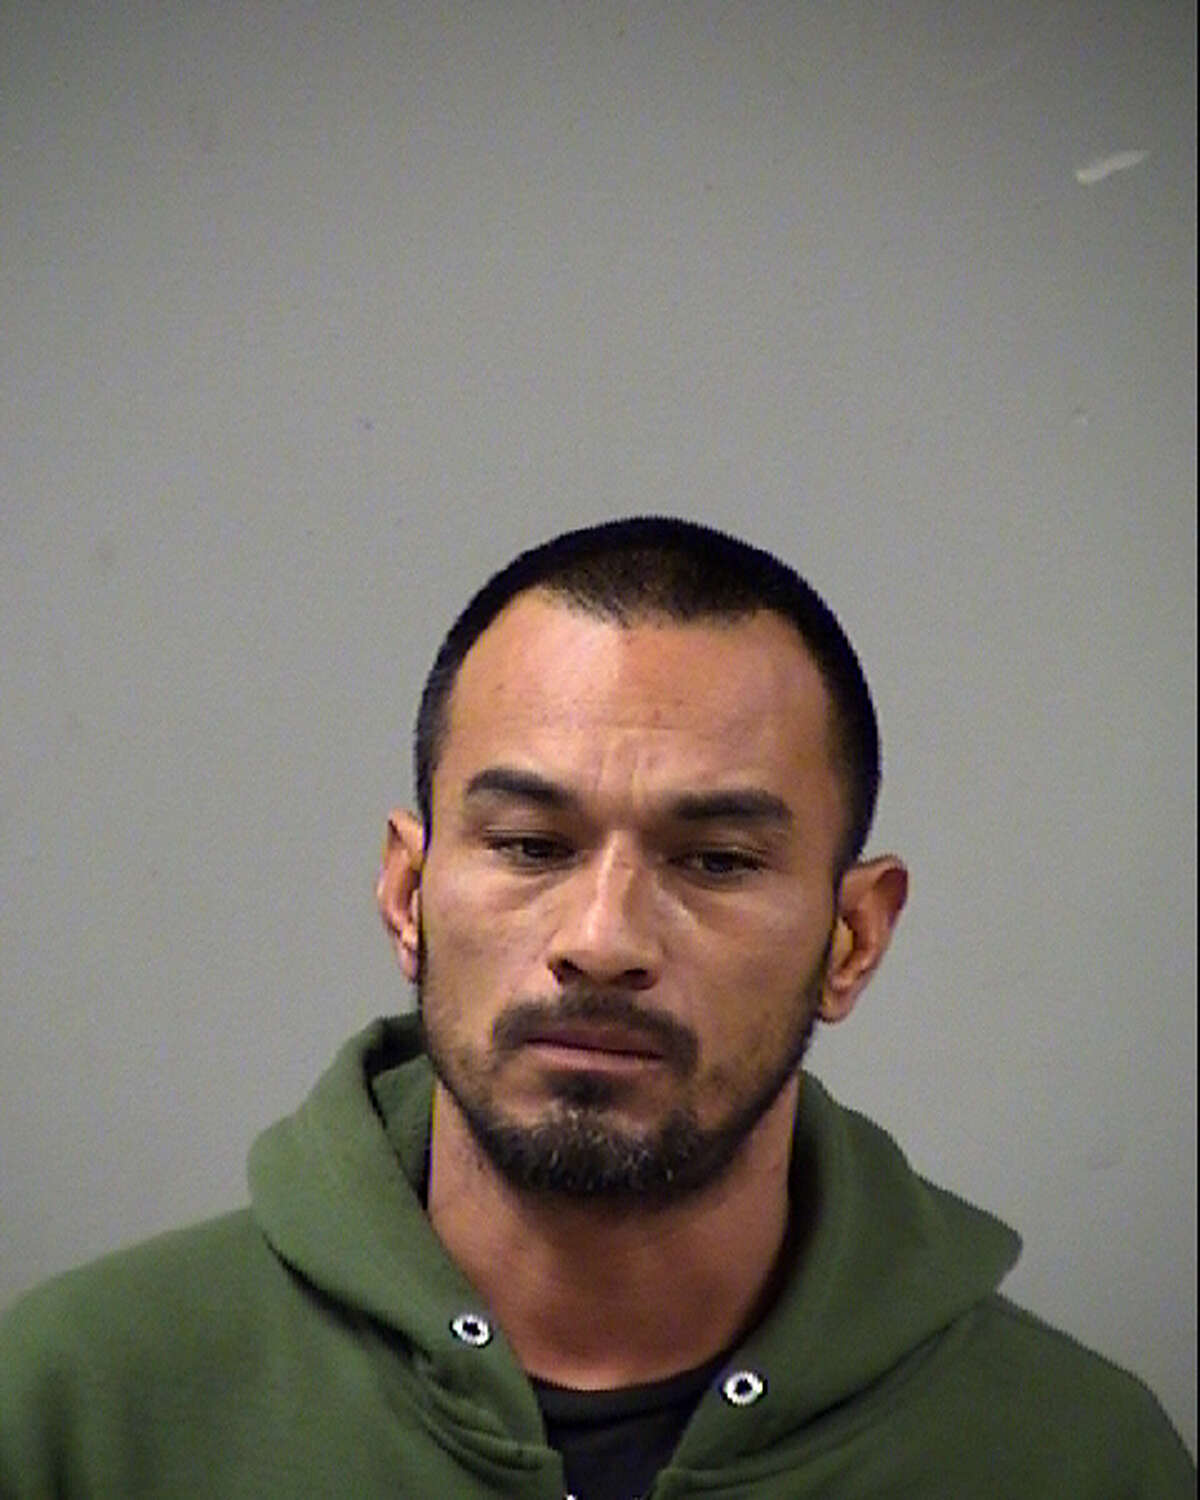 Santiago Nieto was charged with driving while intoxicated with a child on Dec. 8, 2018.